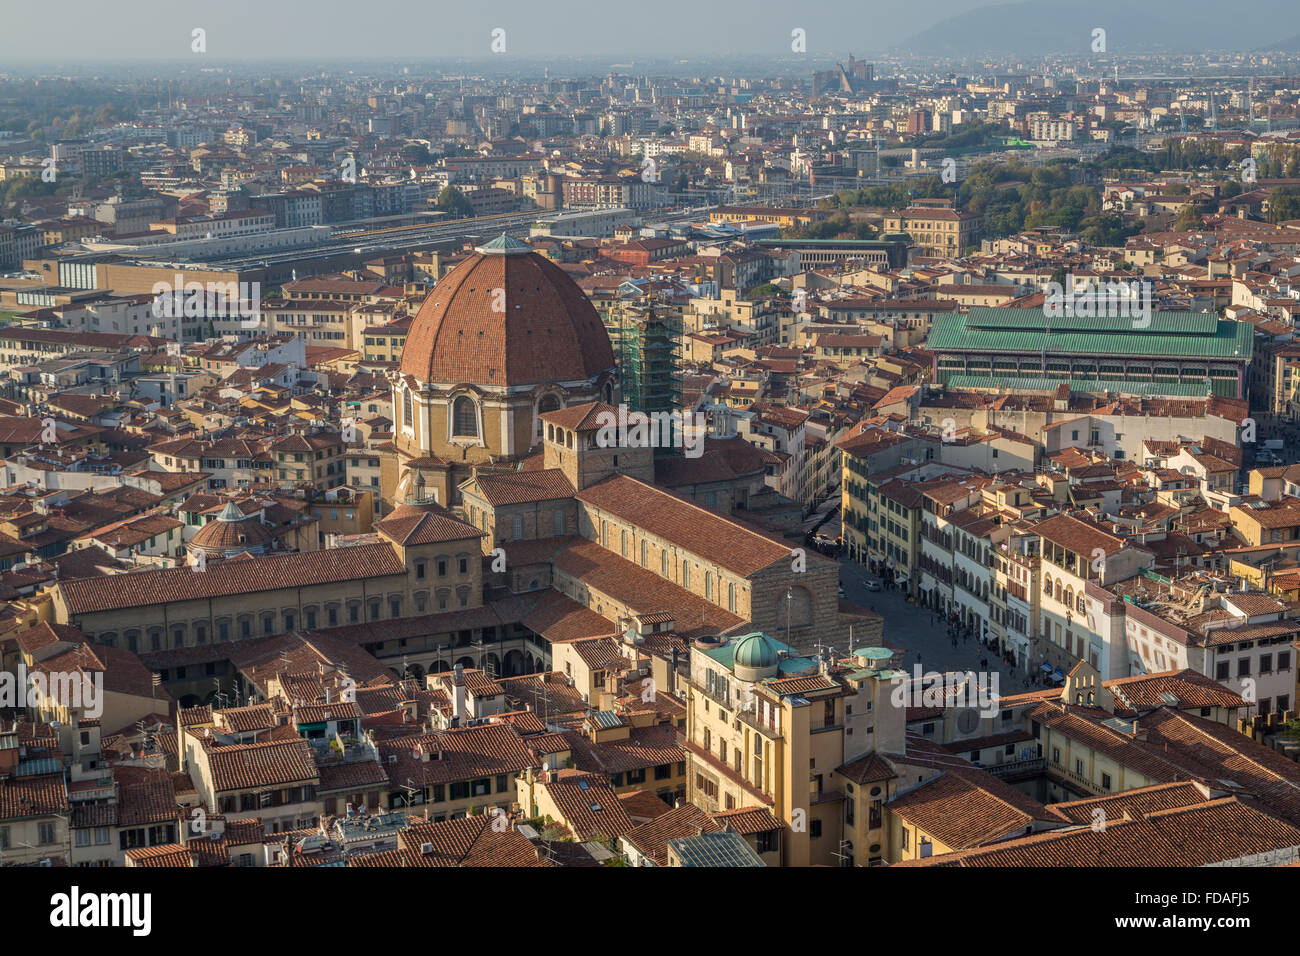 View over the city with Basilica di San Lorenzo and market halls, Florence, Tuscany, Italy Stock Photo